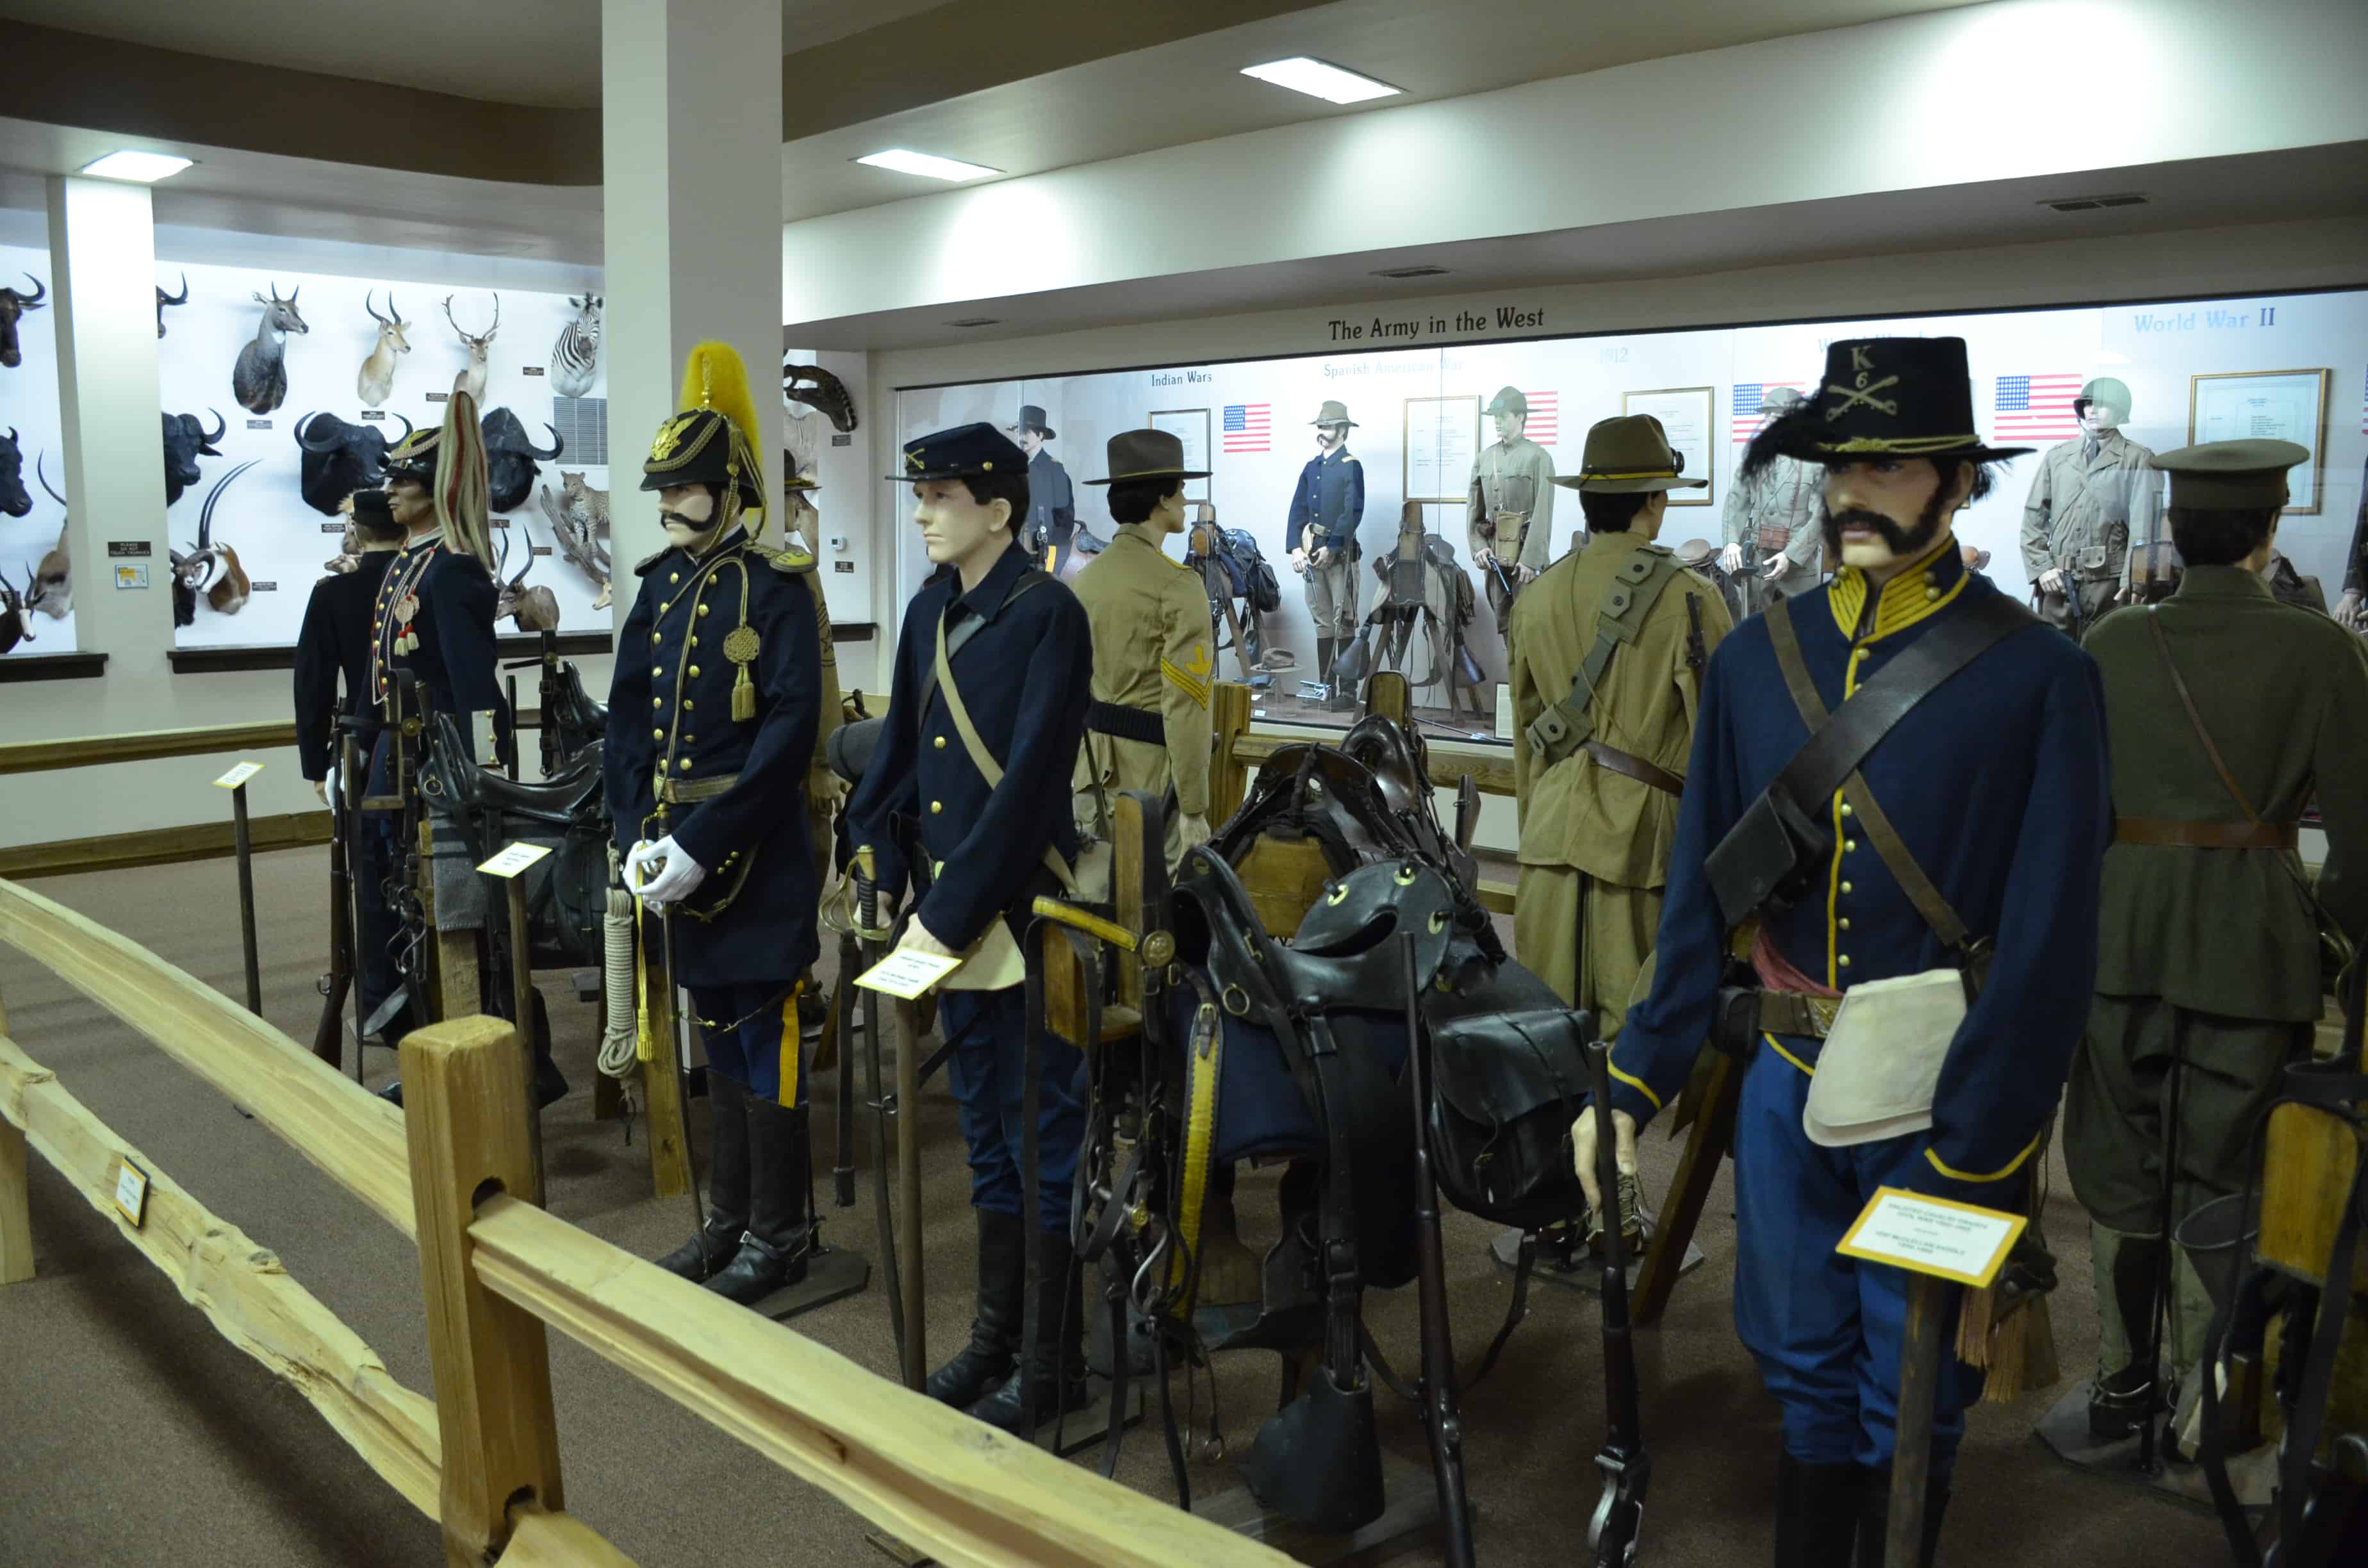 Military uniforms at the Nelson Museum of the West in Cheyenne, Wyoming